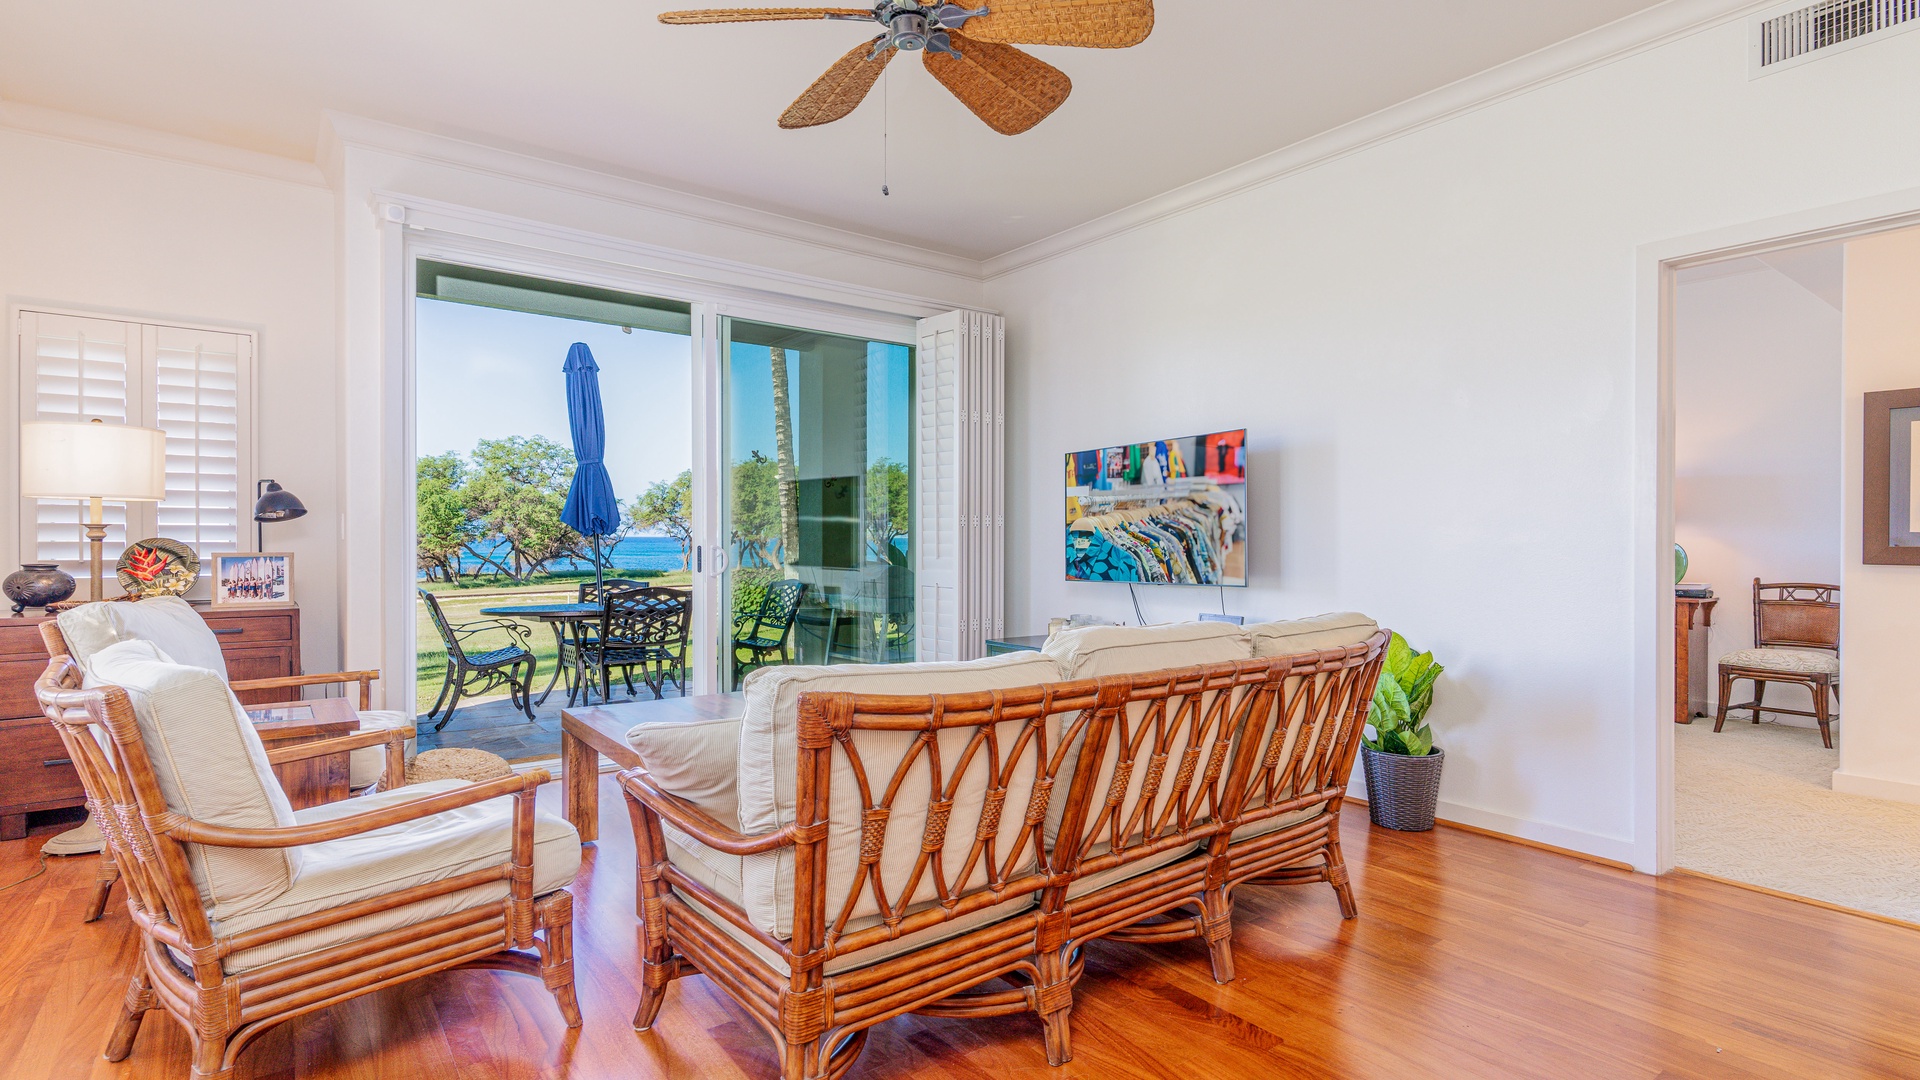 Kapolei Vacation Rentals, Kai Lani 24B - Sink in to the living room couch for a view of the lanai and ocean breezes.